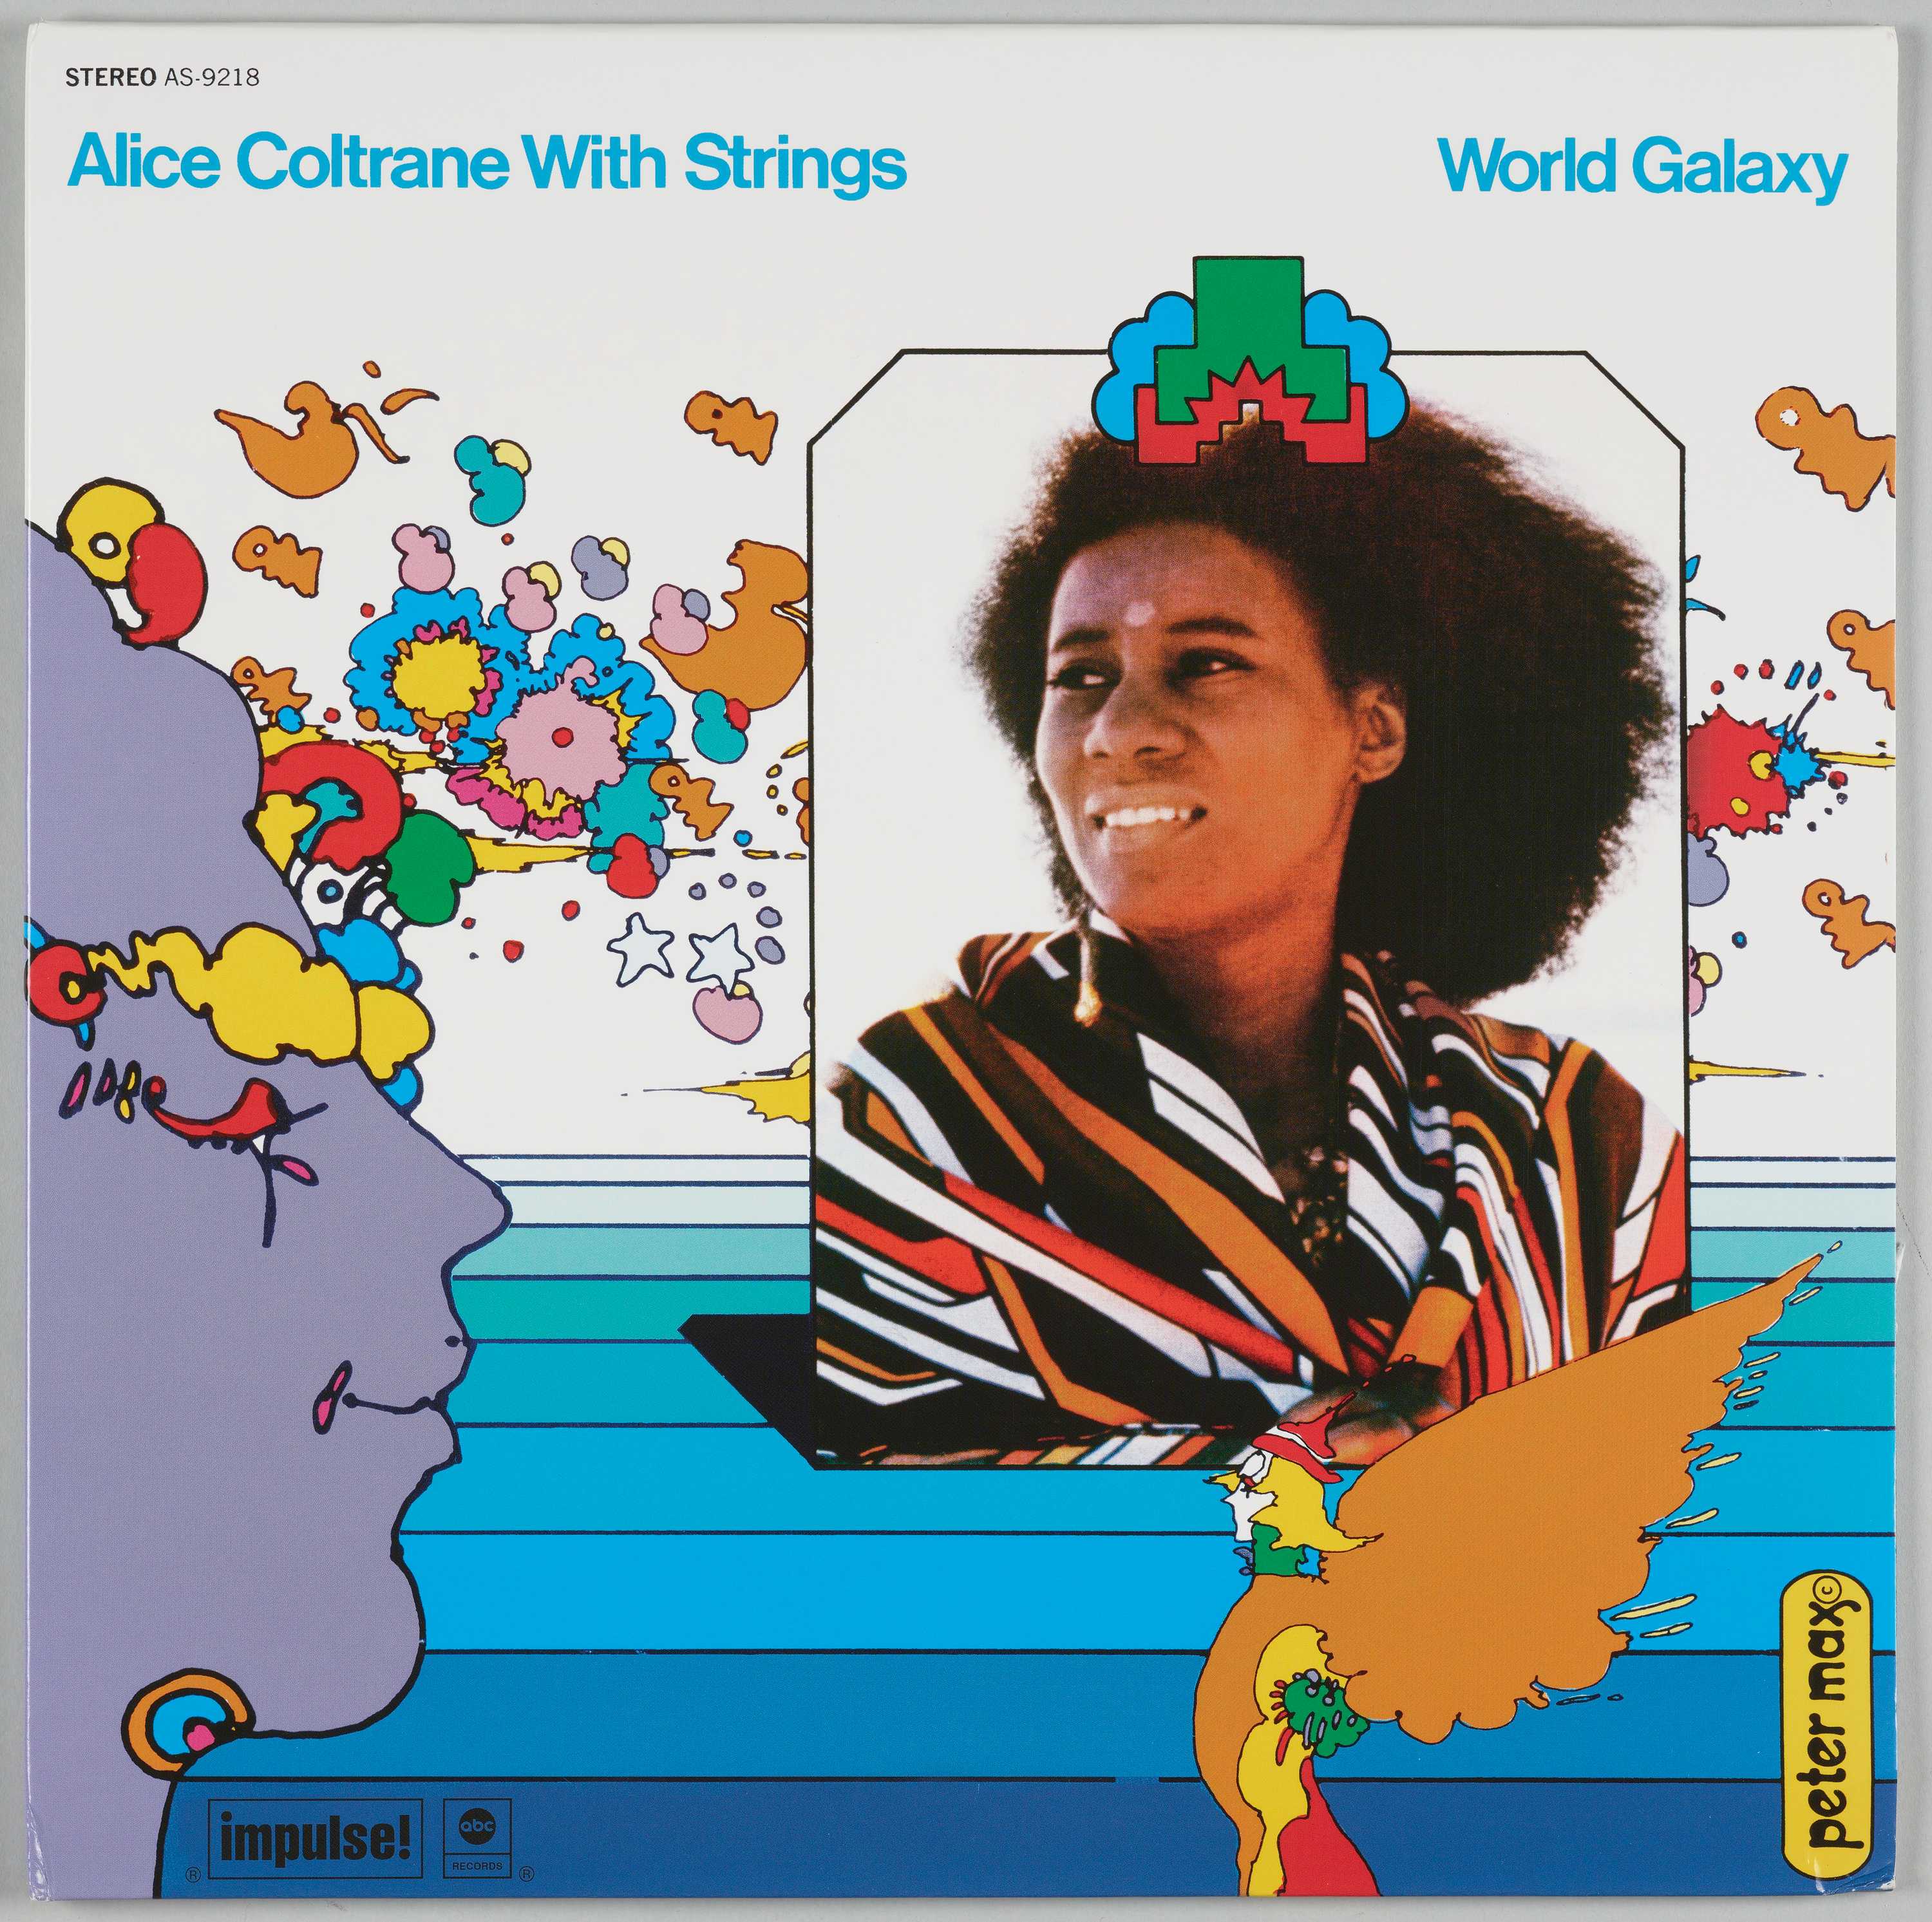 The cover for Alice Coltrane's World Galaxy featuring celestial imagery and her name in typography.